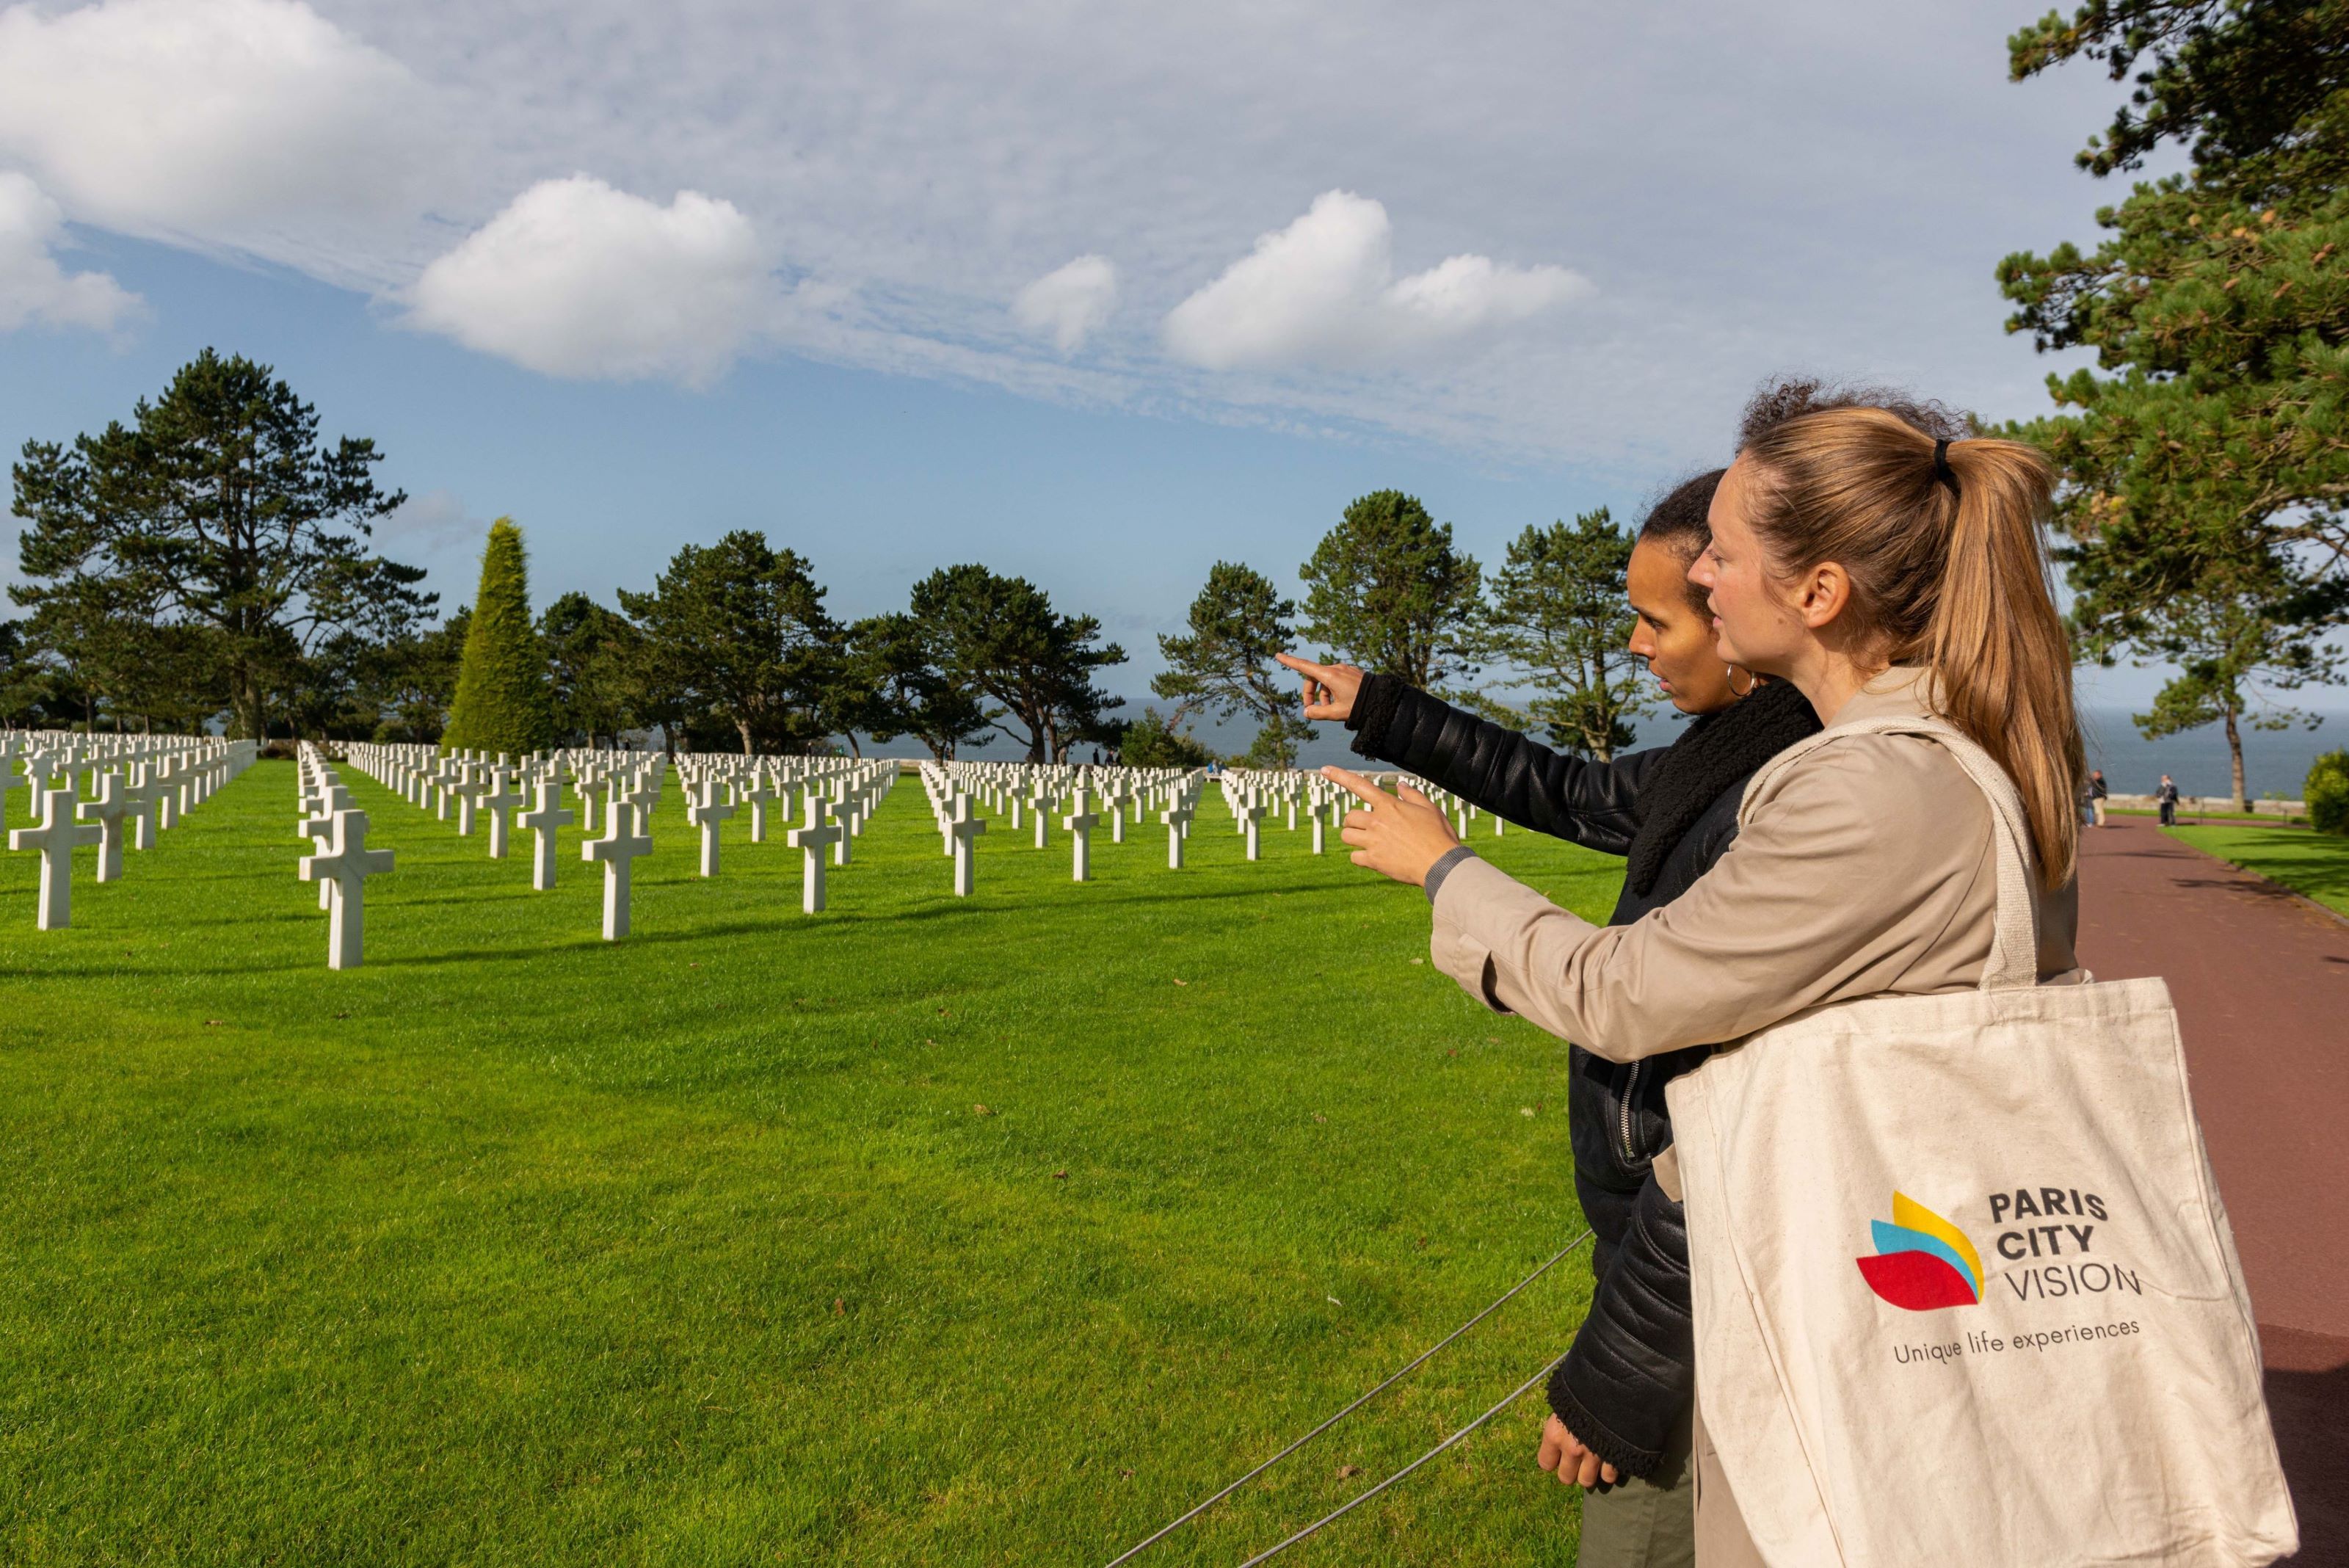 Guided Tour of Normandy D-Day Beaches DayTrip from Paris with transport, lunch included